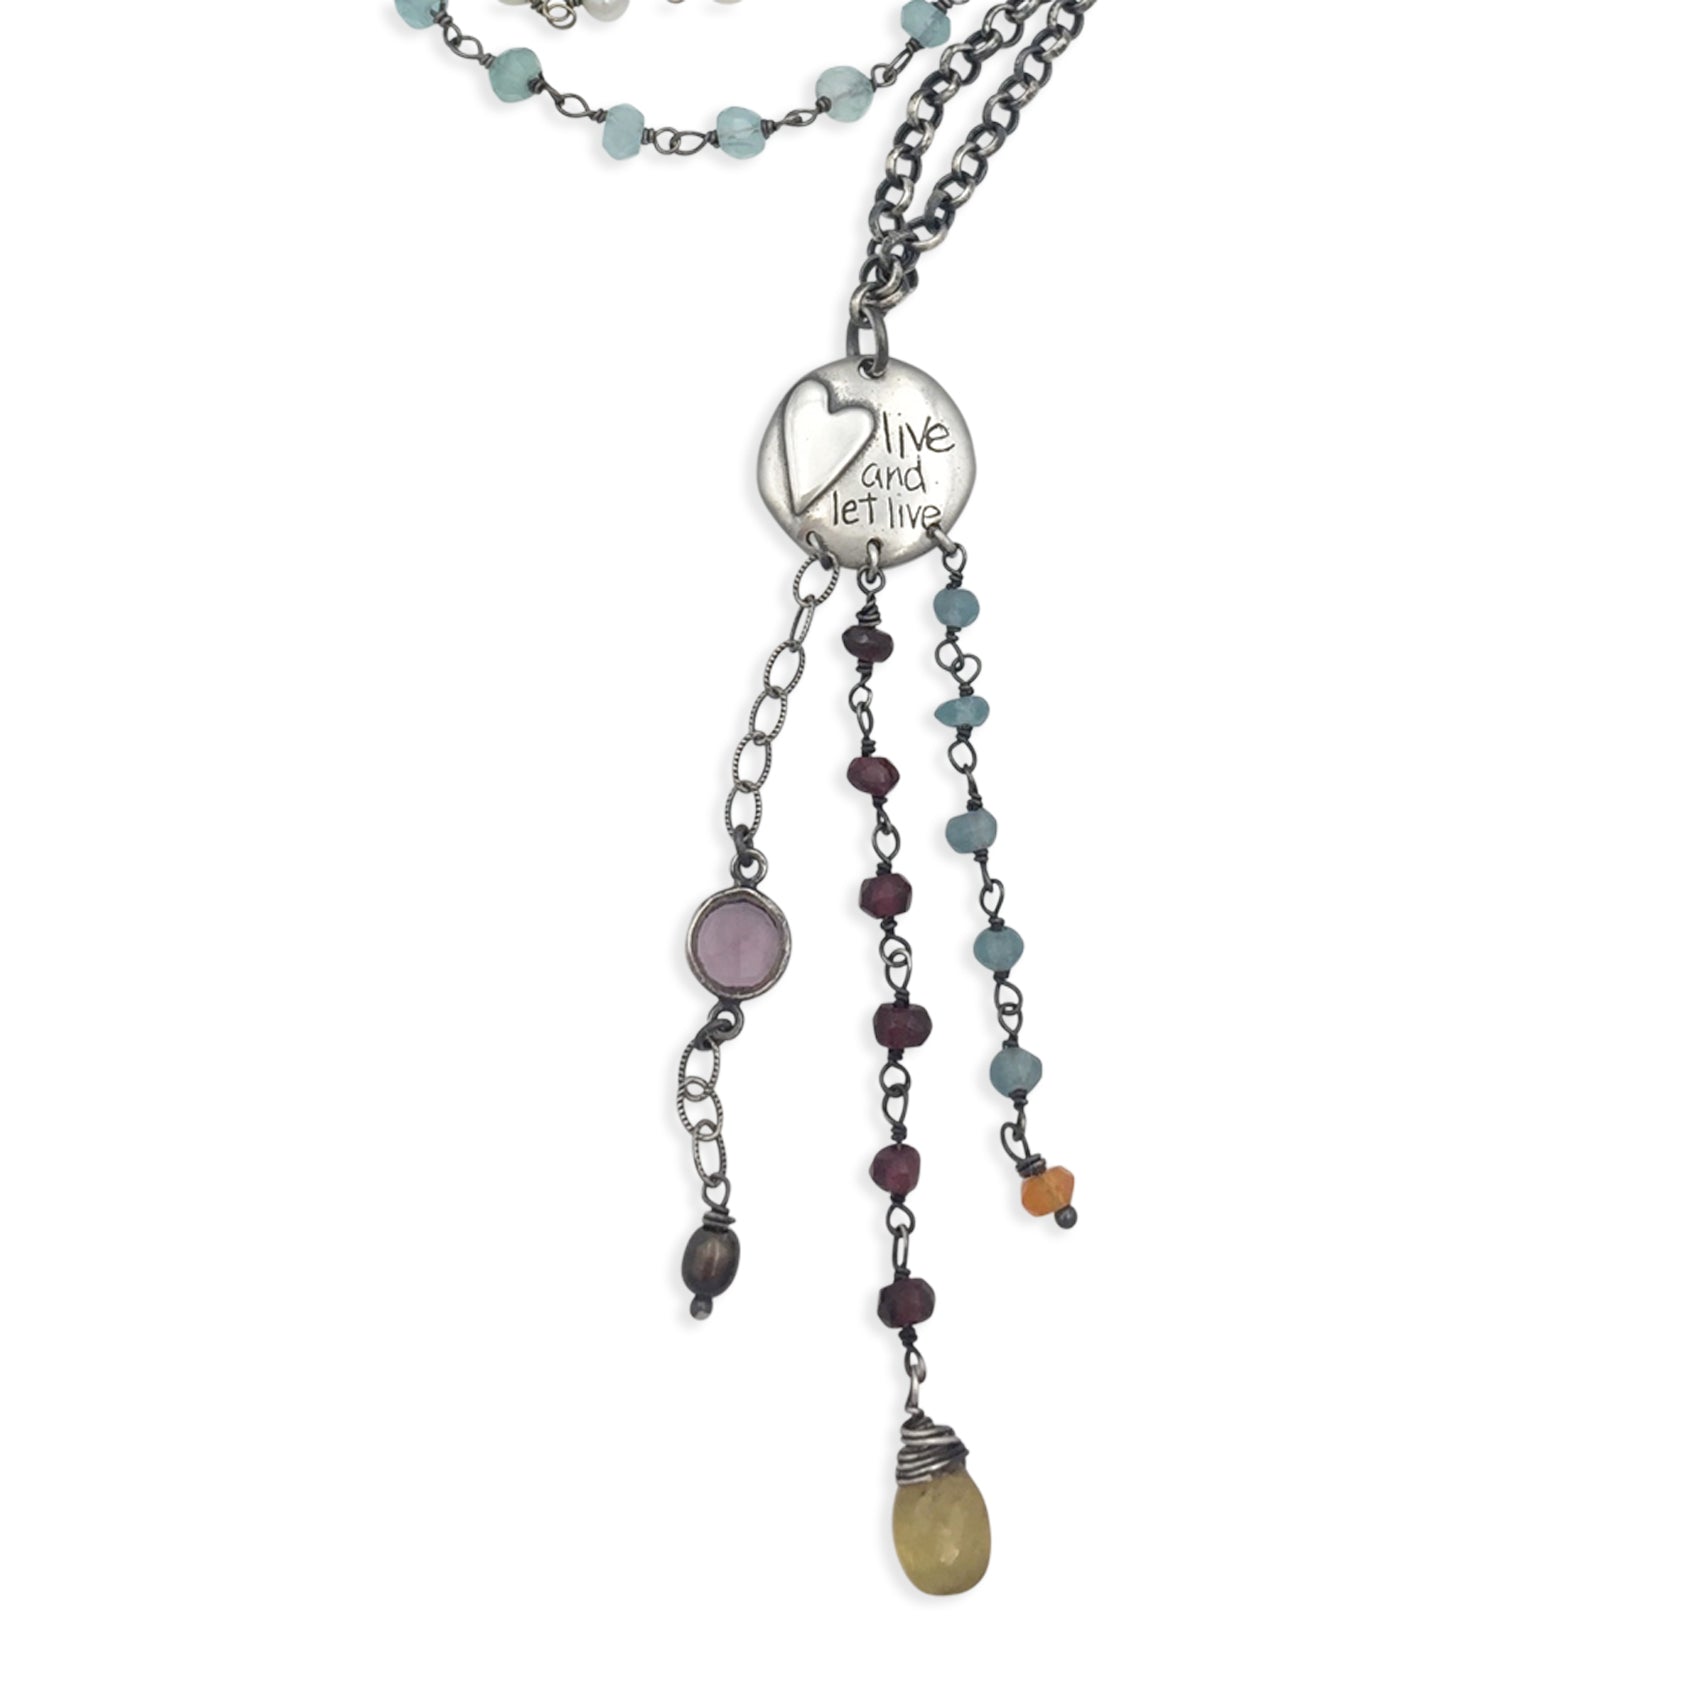 Multi Bead Live and Let Live Necklace